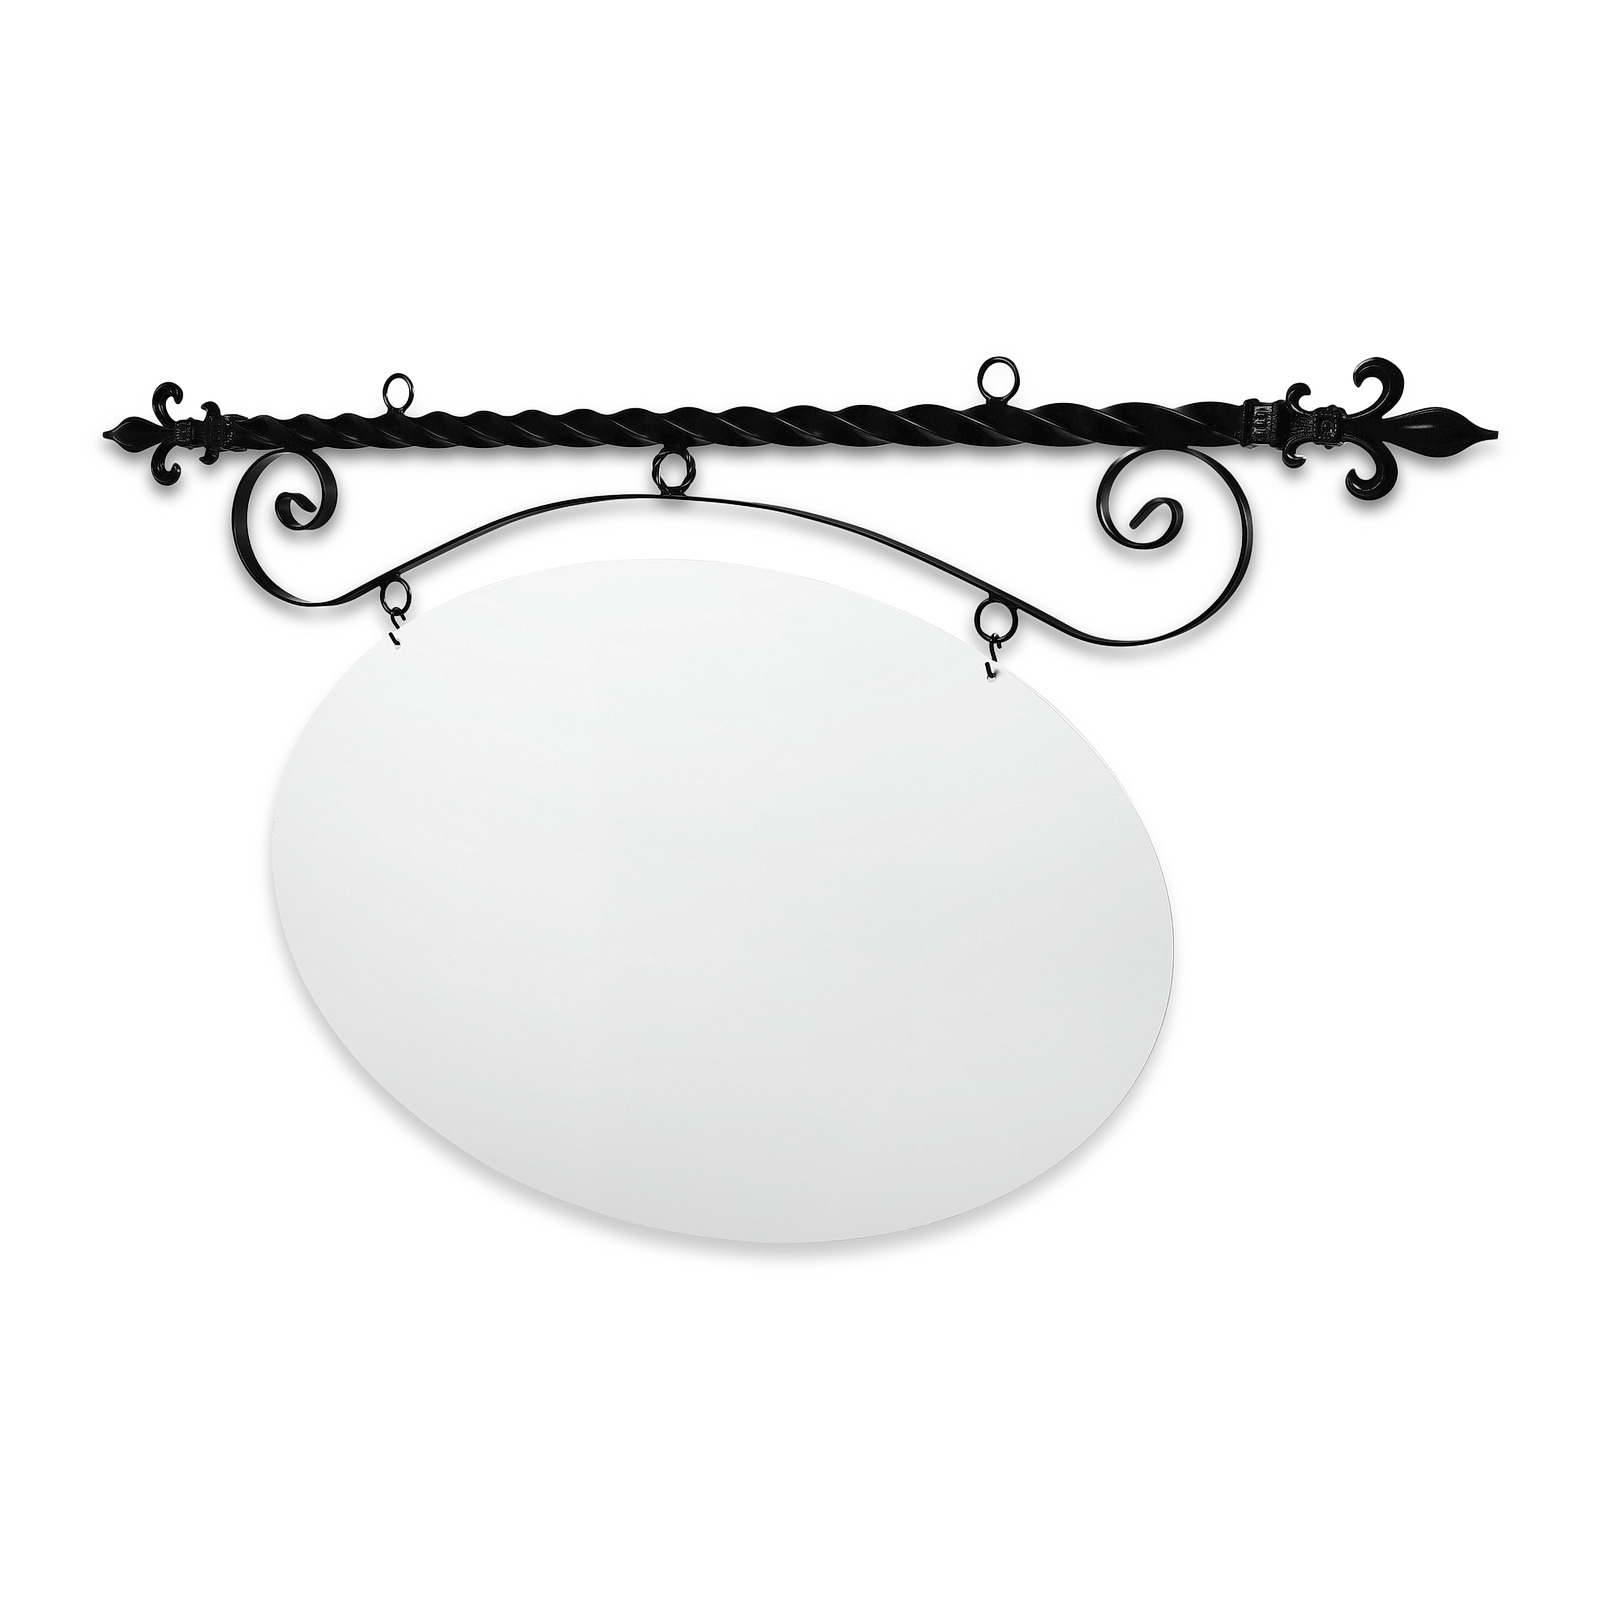 48'' Wide Ceiling Mount Bracket in  Black Powder Coated Steel with 30'' Tall X 46'' Wide X .080'' Thick White Aluminum Sign Blank and 2 Black Powder Coated S-Hooks (Fleur De Lis Finial)